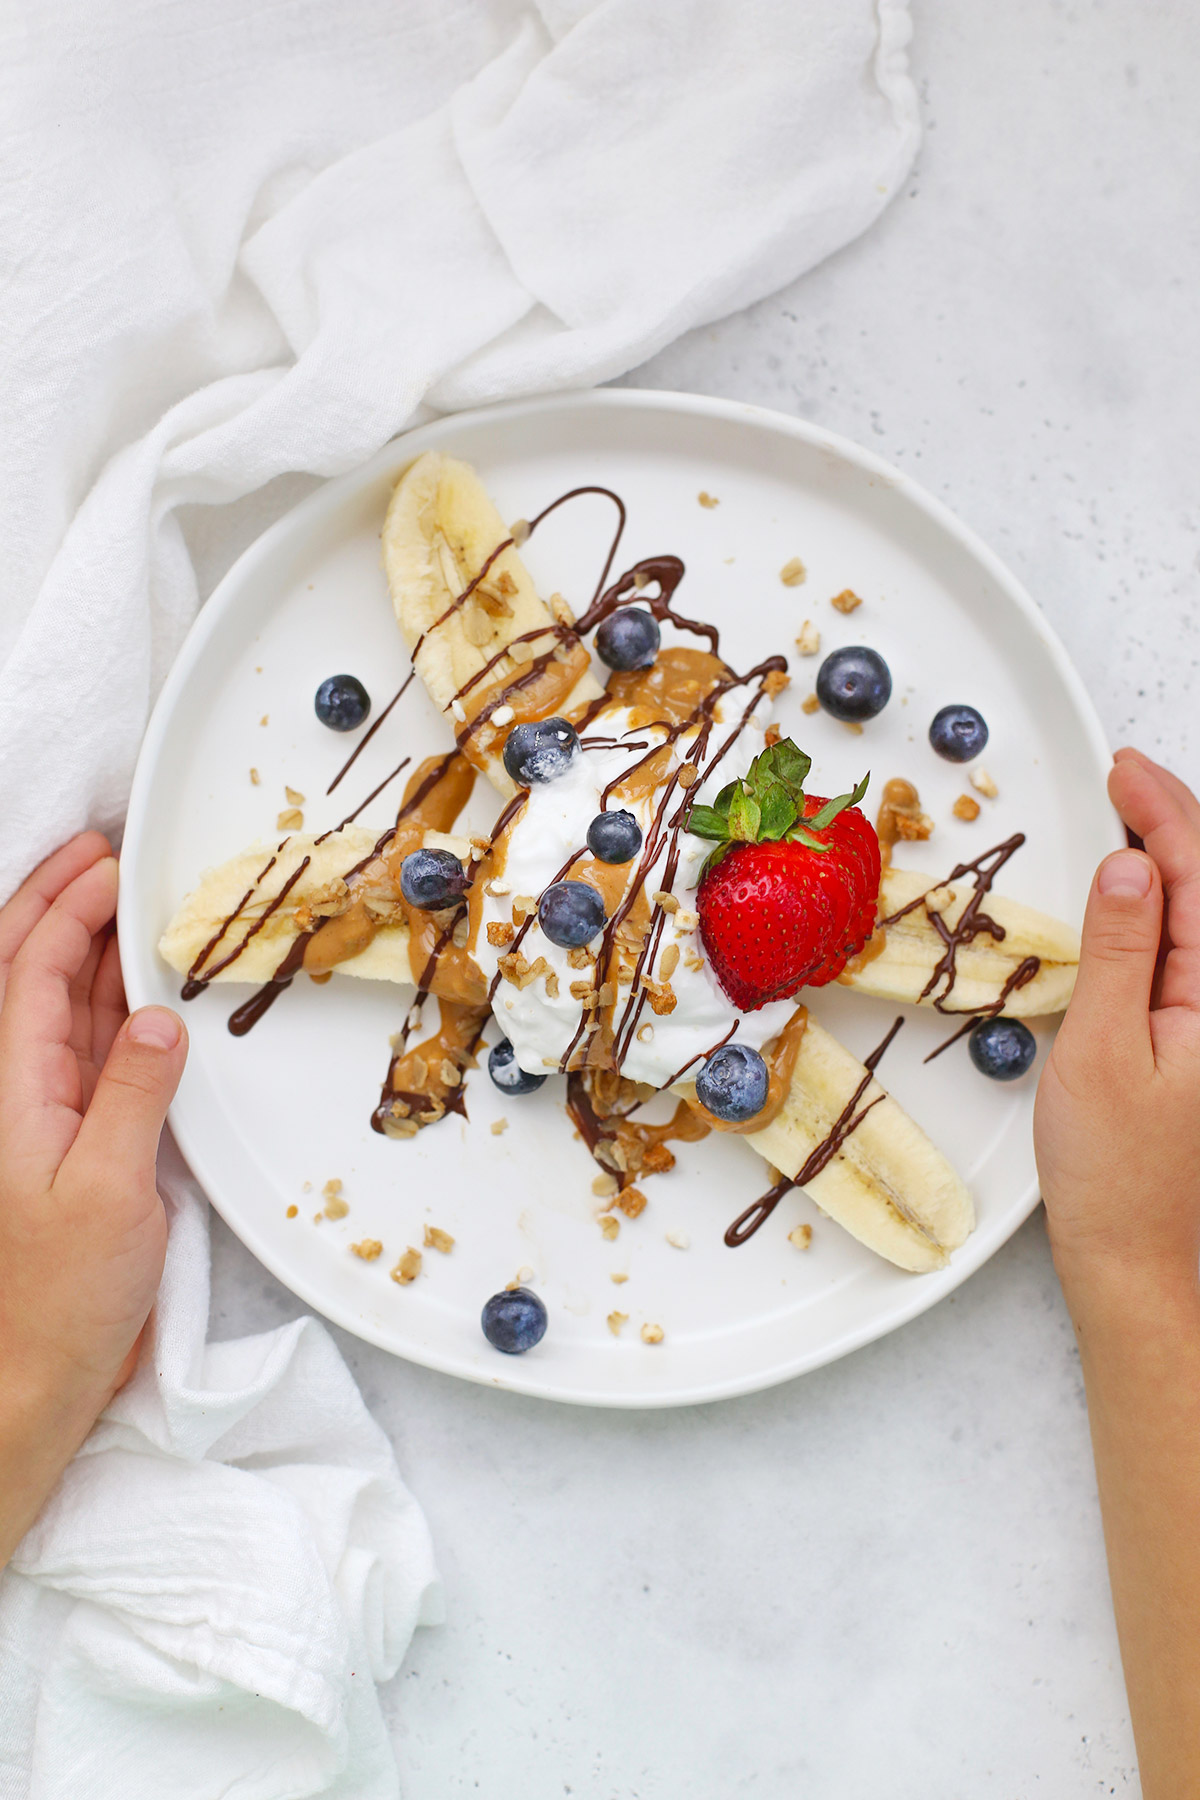 Hands holding a Healthy Banana Split with Yogurt, Peanut Butter, Chocolate, and berries on a white plate